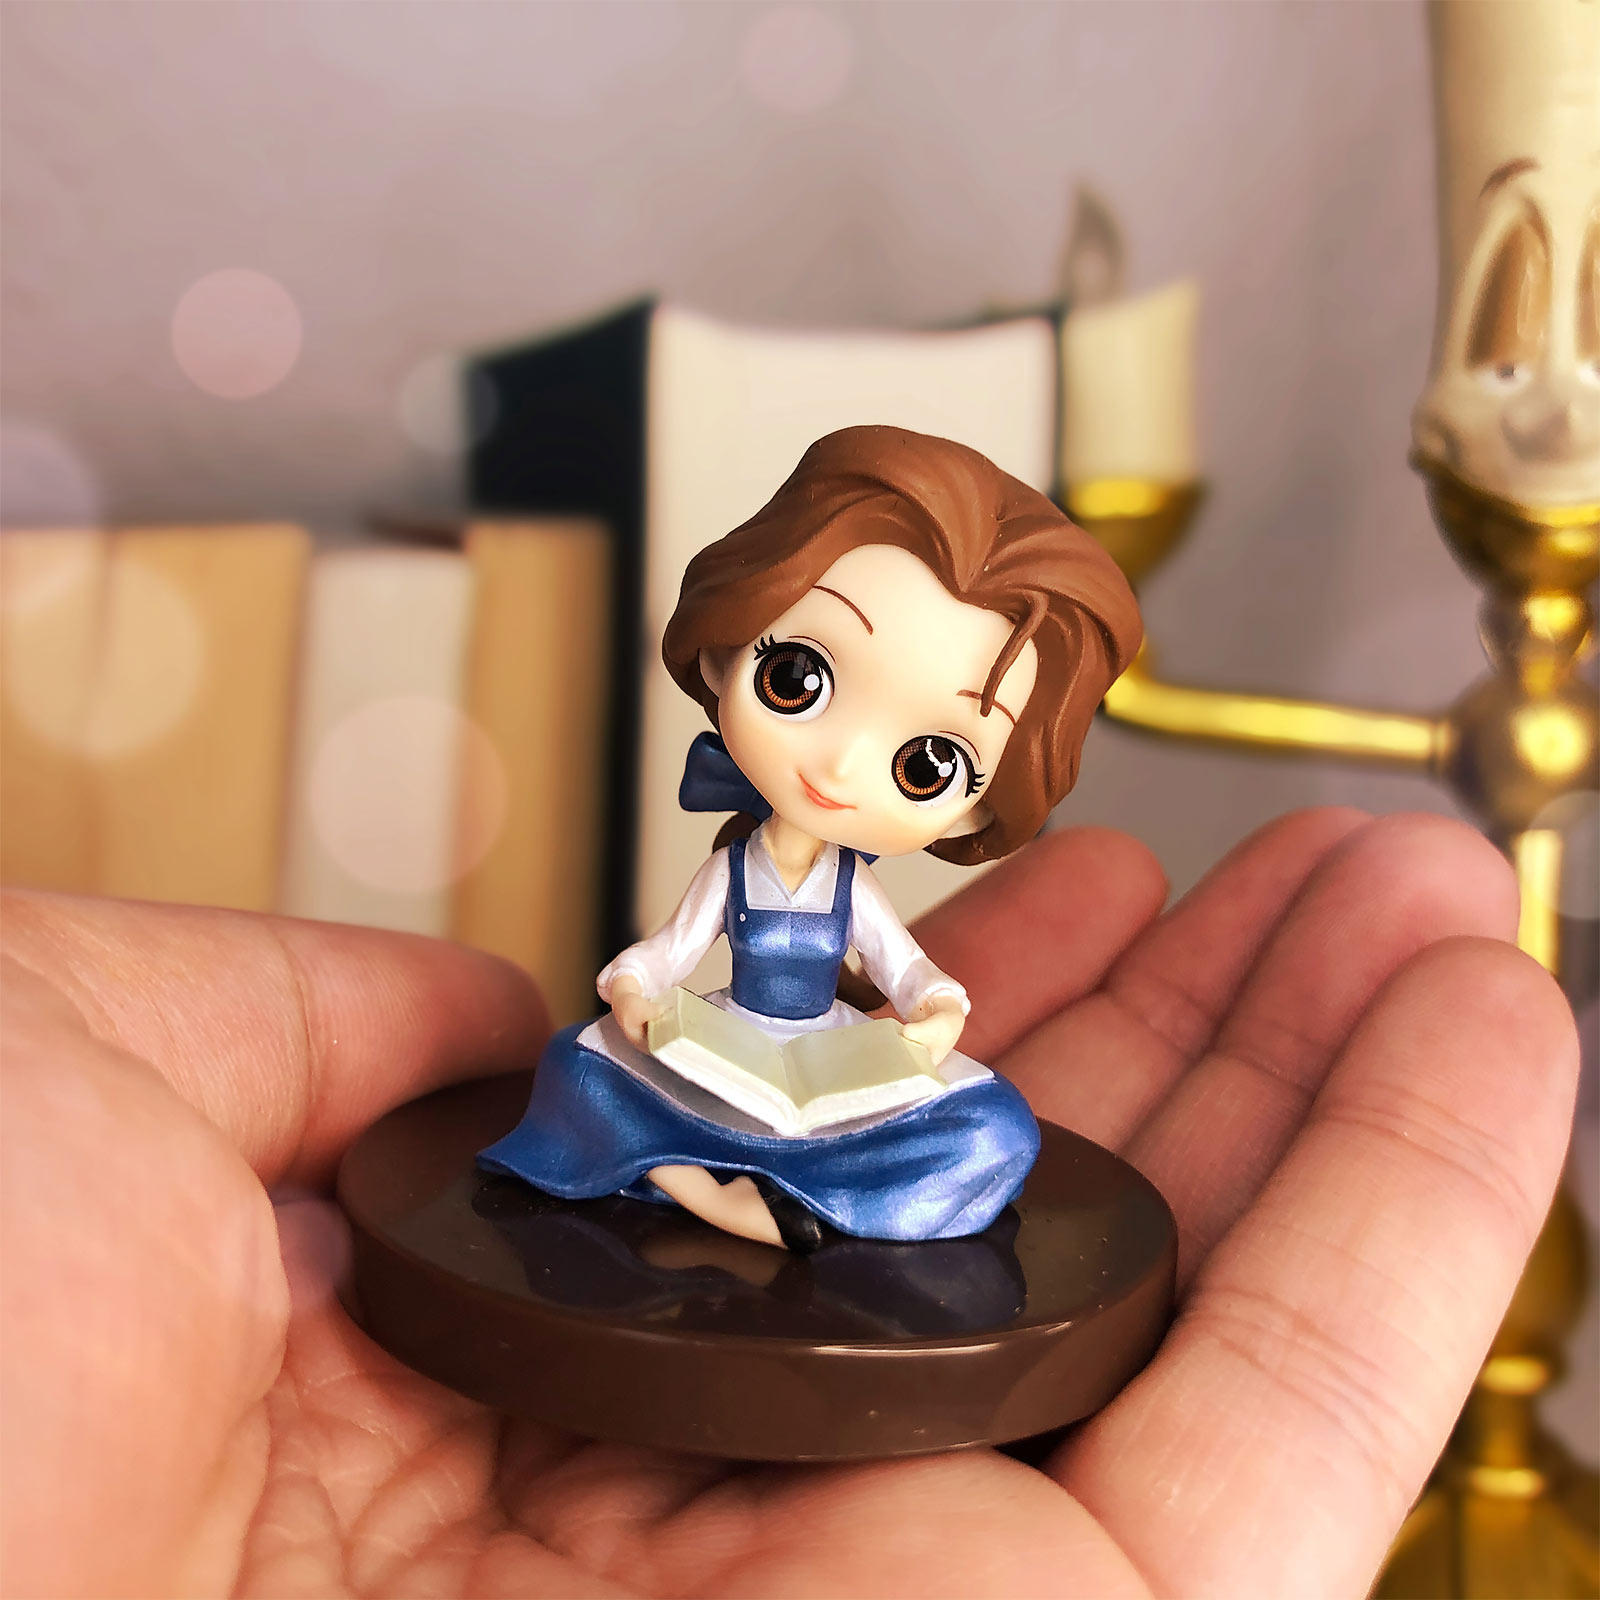 Beauty and the Beast - Belle Q Posket Figure 5 cm